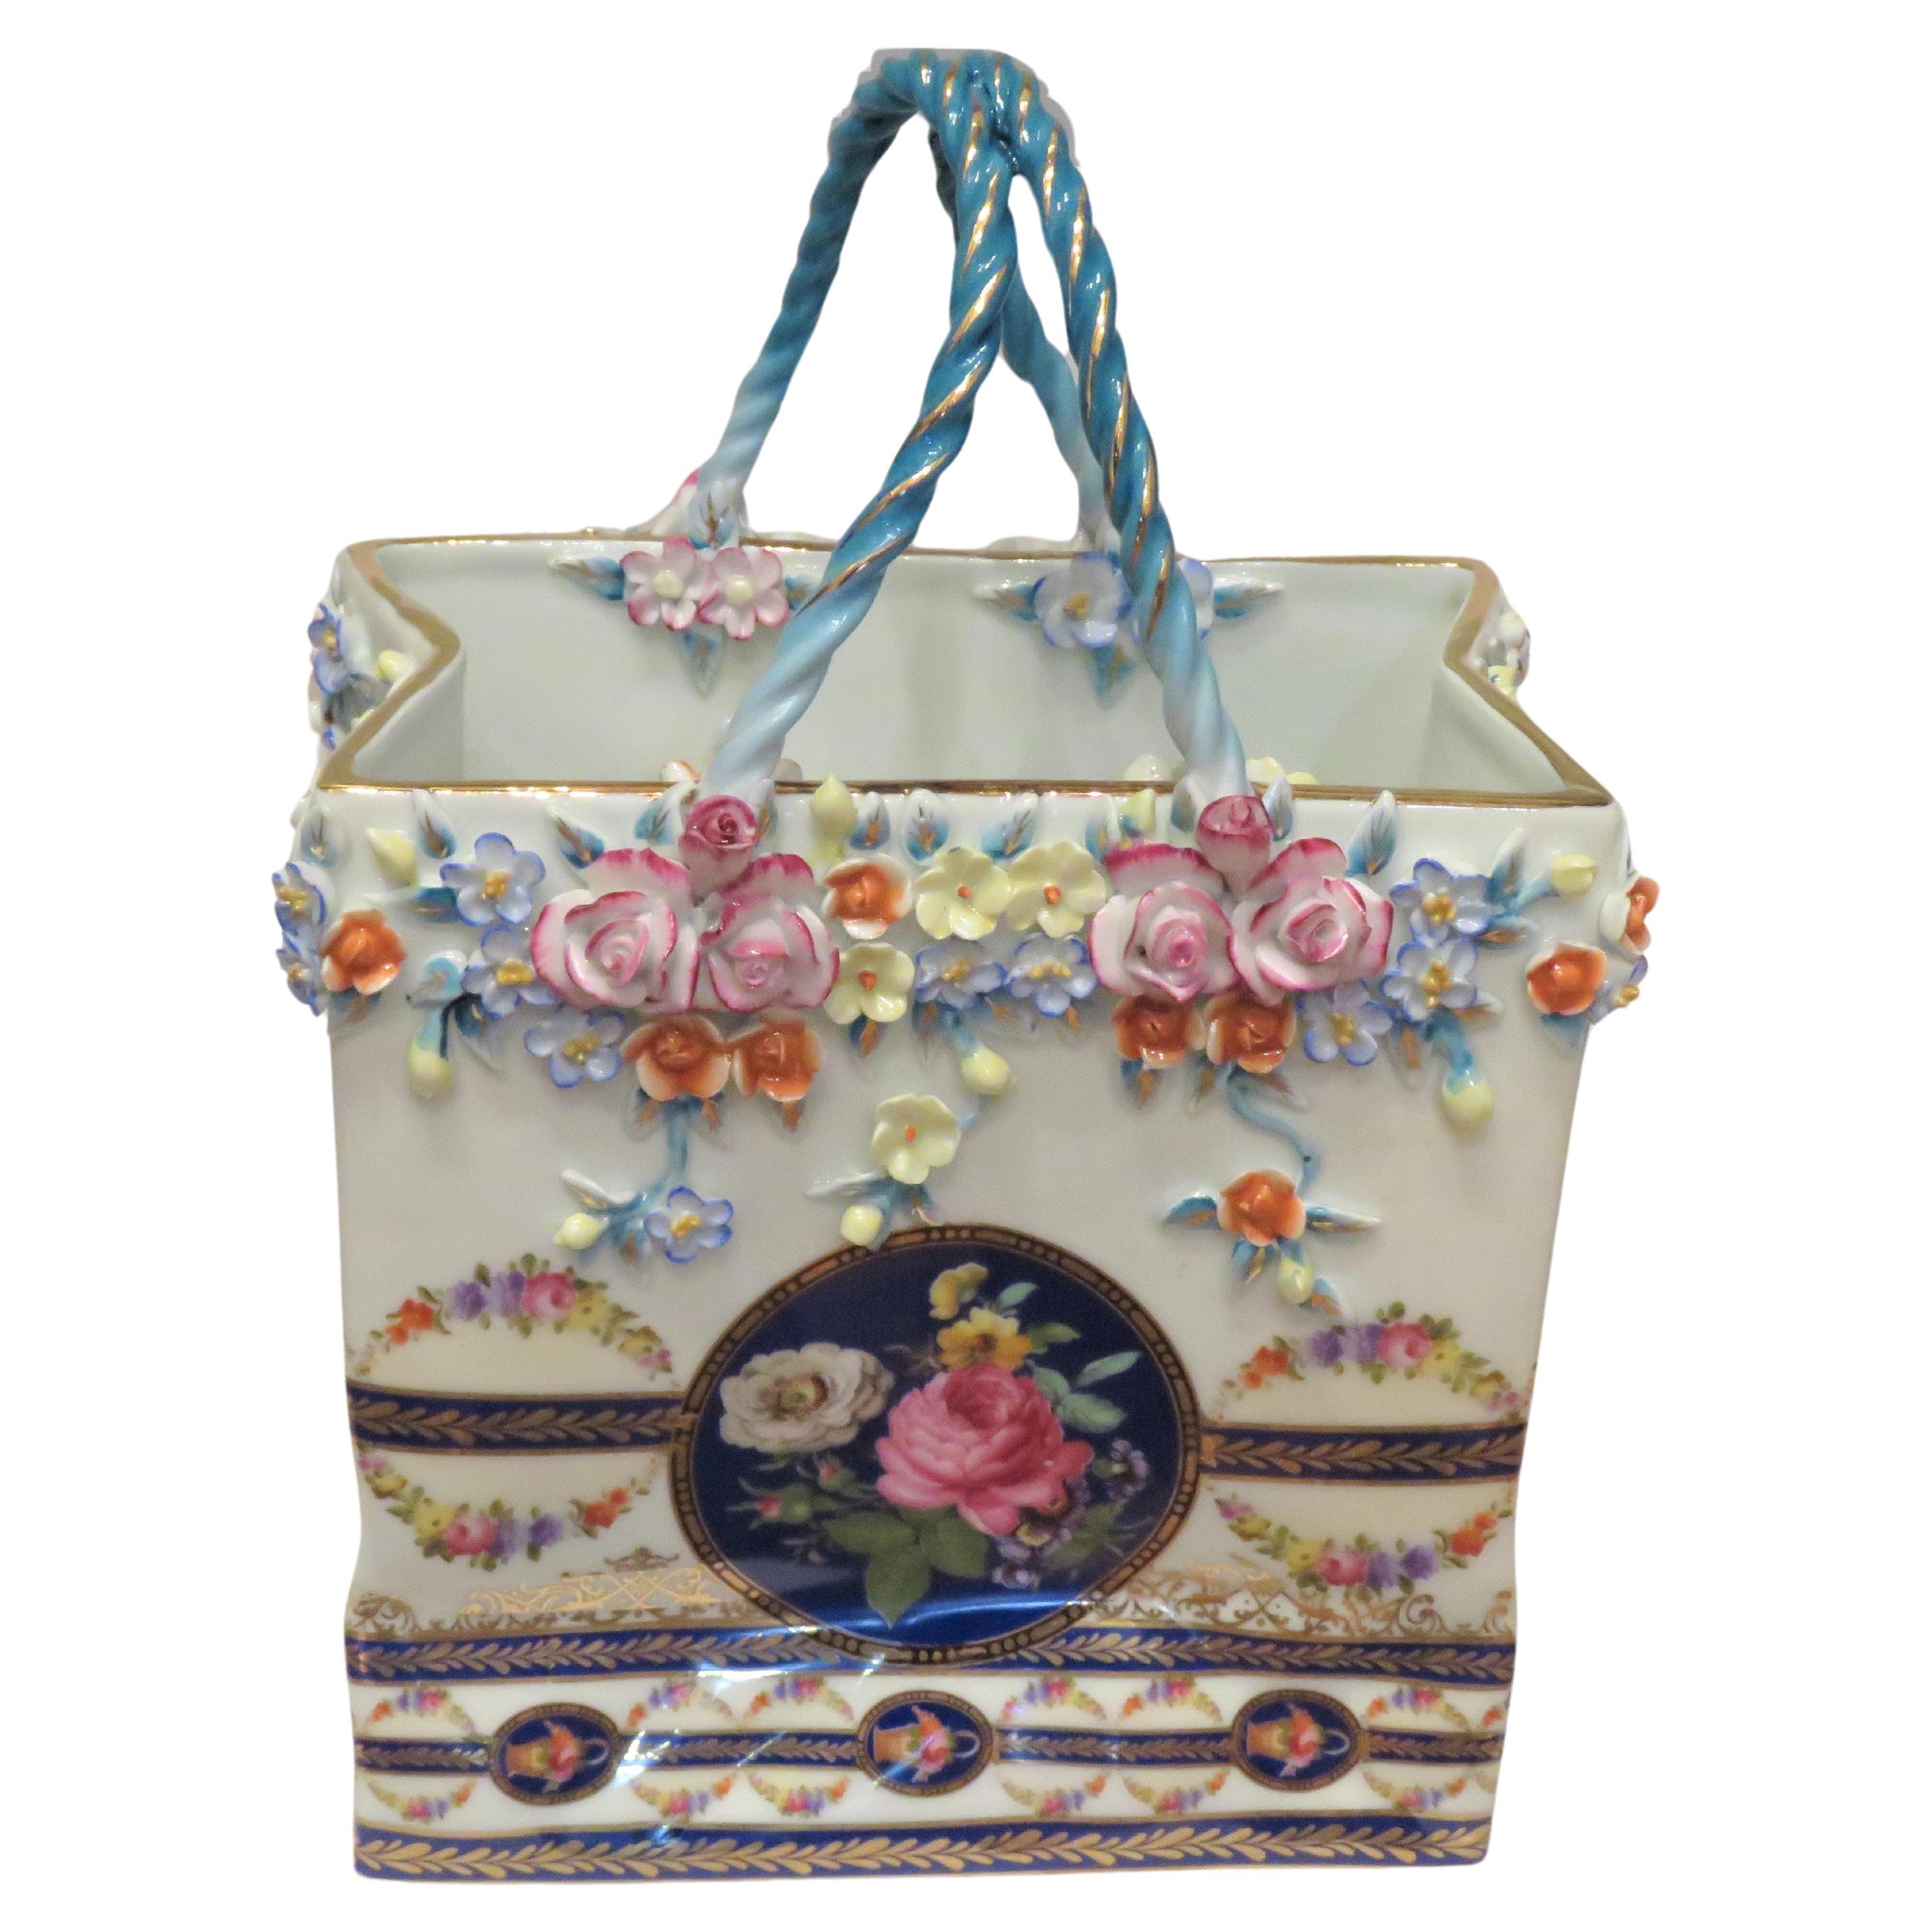 Rare Important Gorgeous Sevres Style / Dresden Style Porcelain Shopping Bag